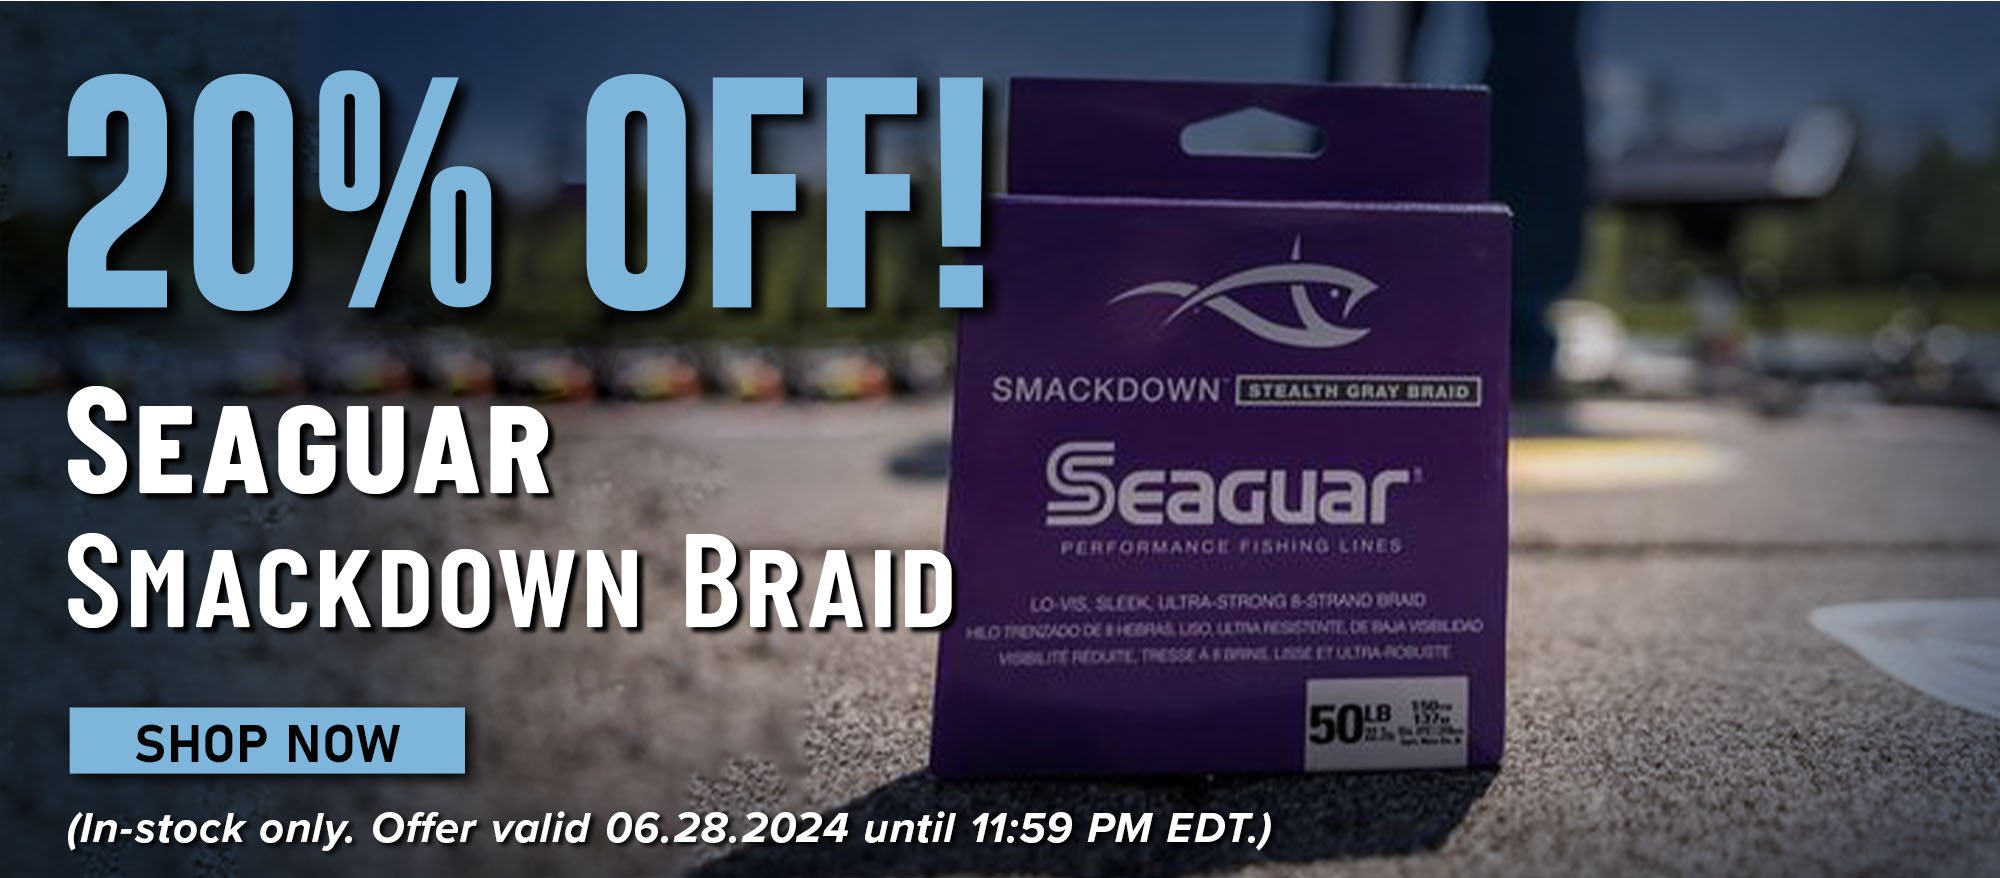 20% Off! Seaguar Smackdown Braid Shop Now (In-stock only. Offer valid 06.28.2024 until 11:59 PM EDT)